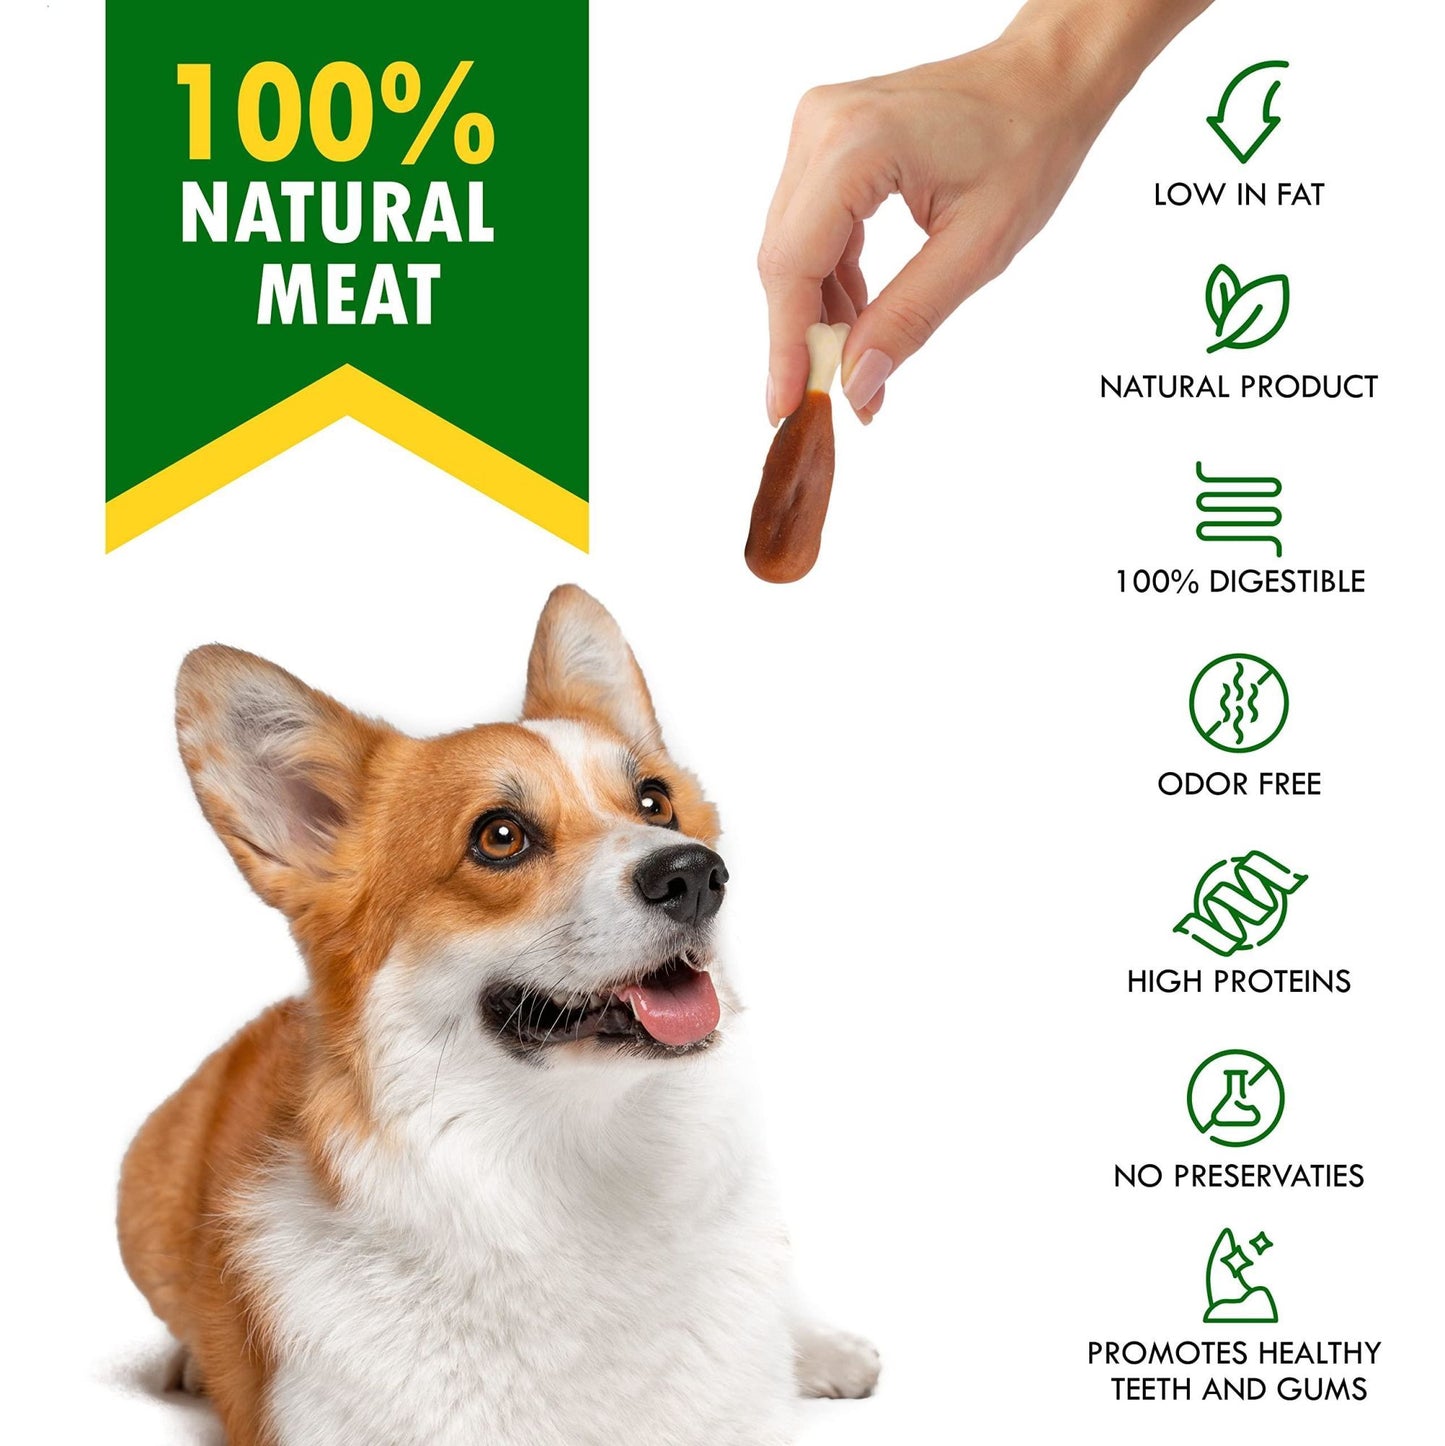 Dog Calcium Bones Wrapped Chicken & Rawhide Free Chew Treats Pet Healthy Dried Snacks Grain Free Organic Meat Chews for Training Small Large Dogs